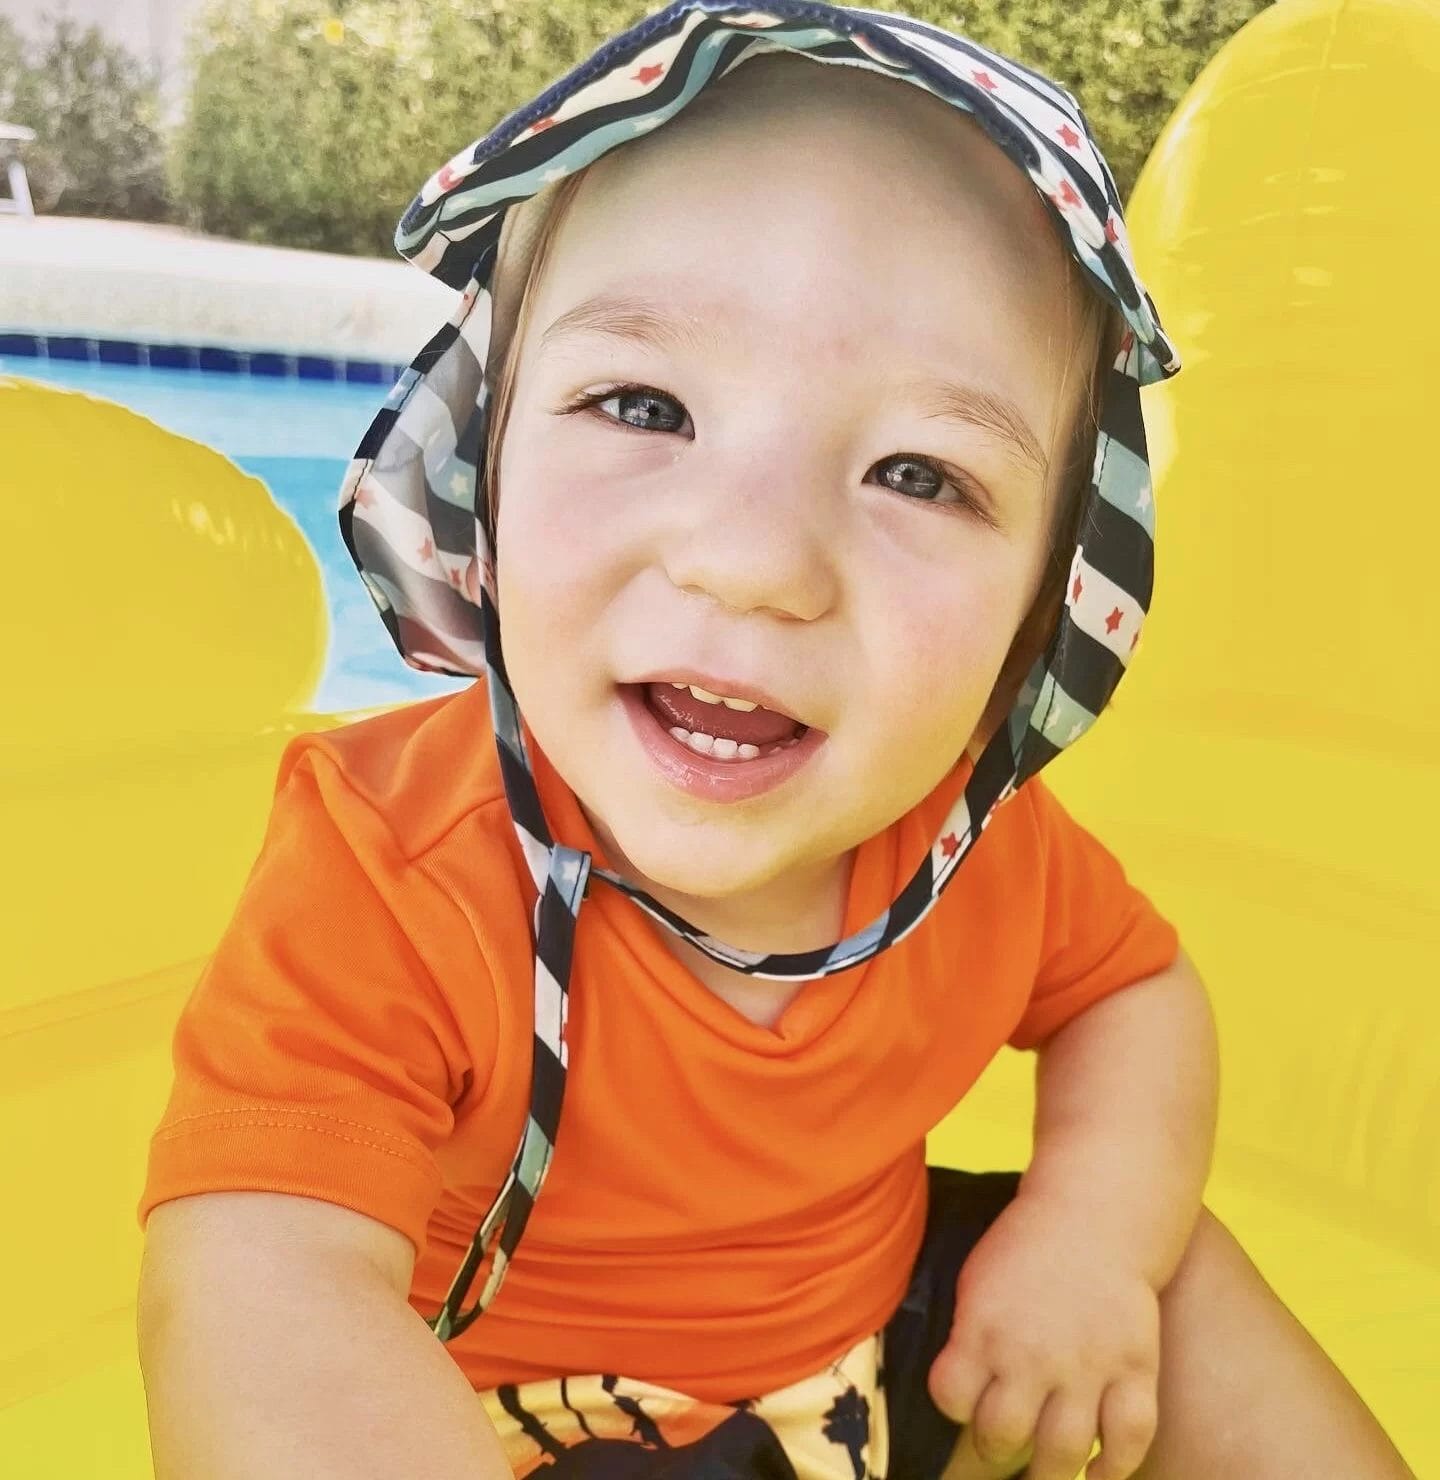 Jordan our ambassador for united cerebral palsy wearing a hat in a pool.